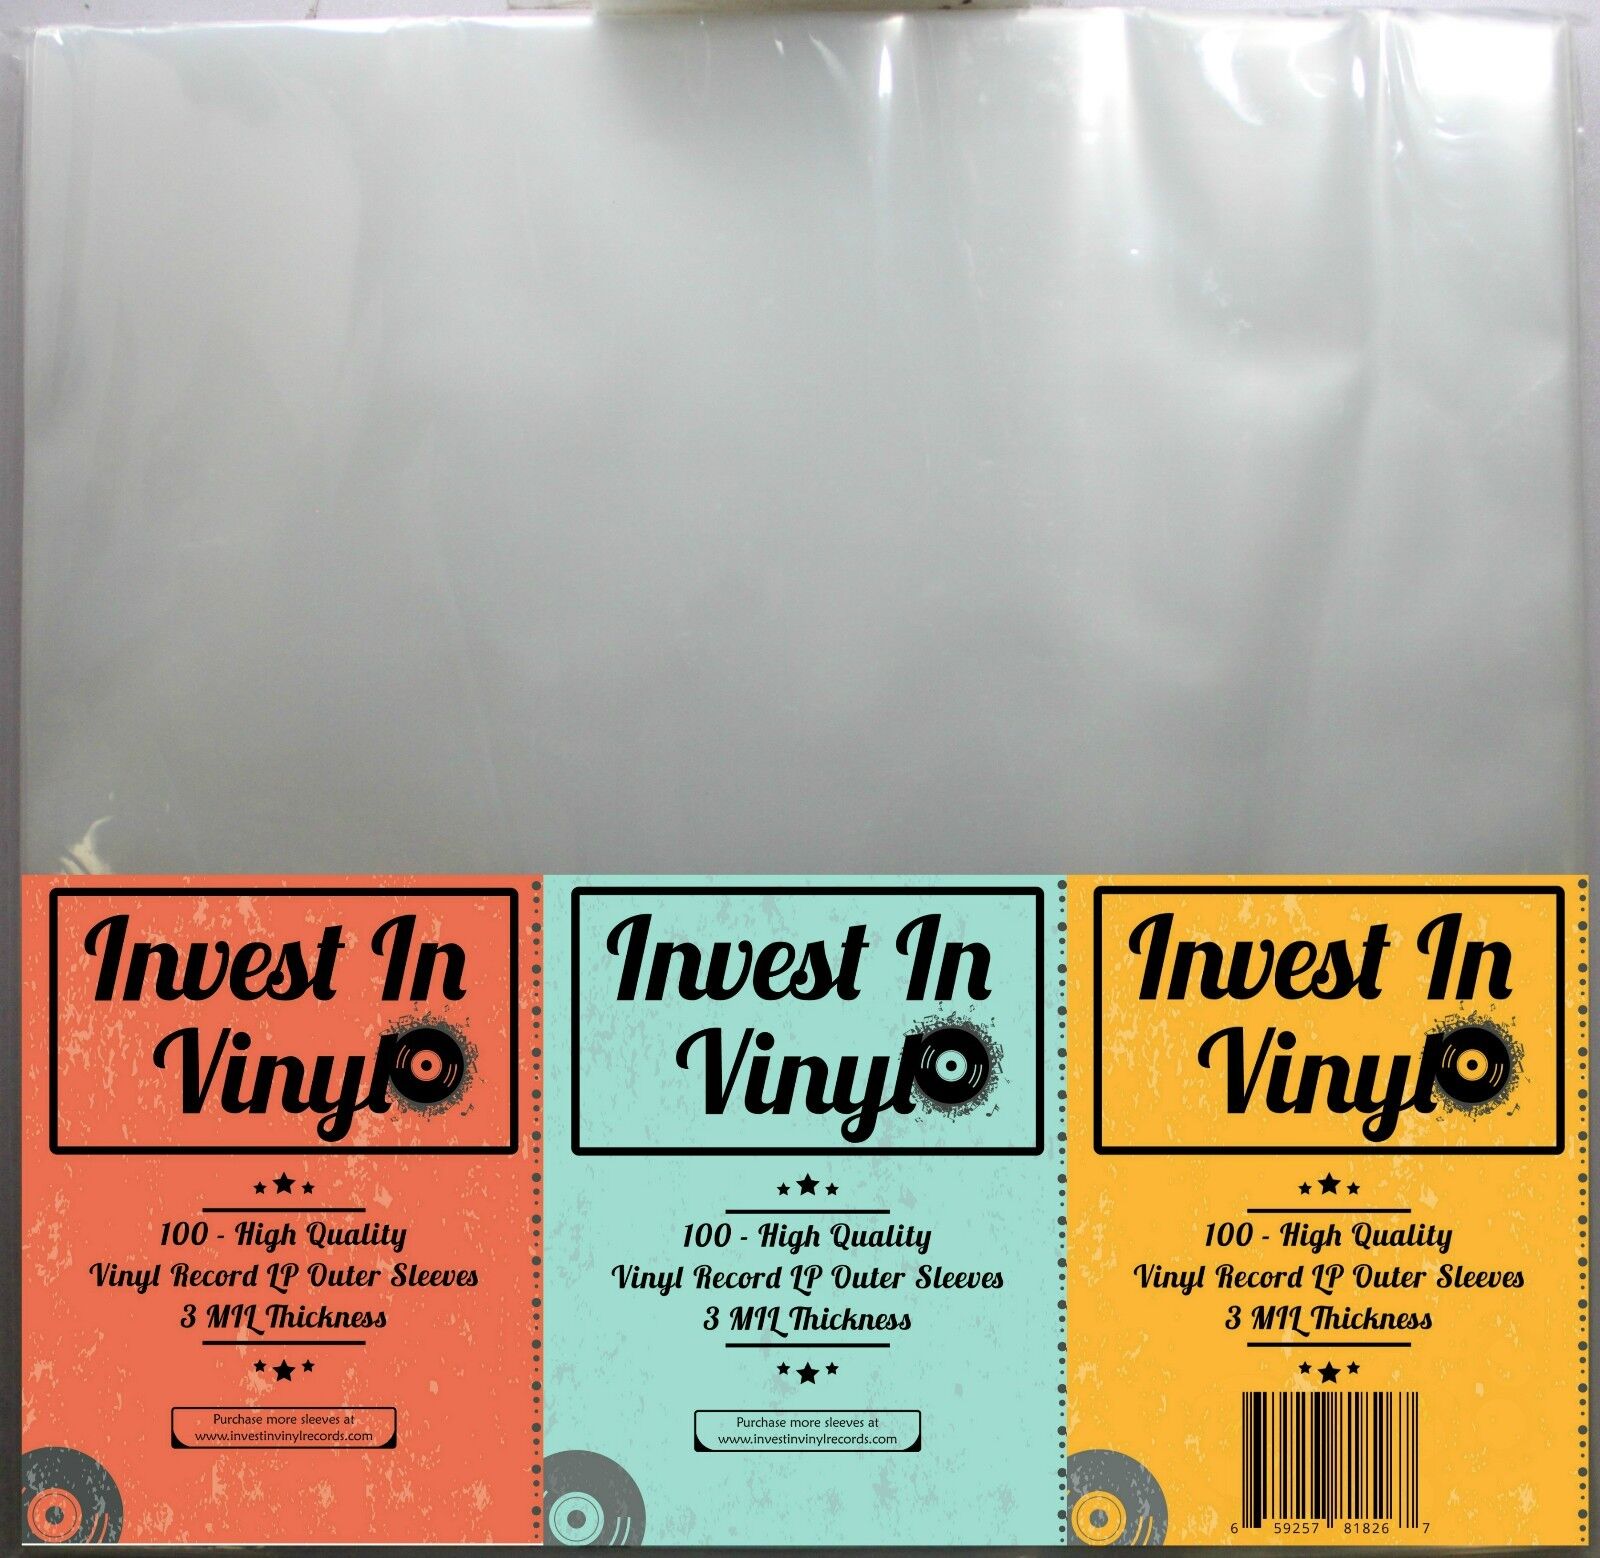 100 Clear Plastic LP Outer Sleeves 3 Mil. HIGH QUALITY Vinyl Record Album Covers Invest In Vinyl 12SP3M